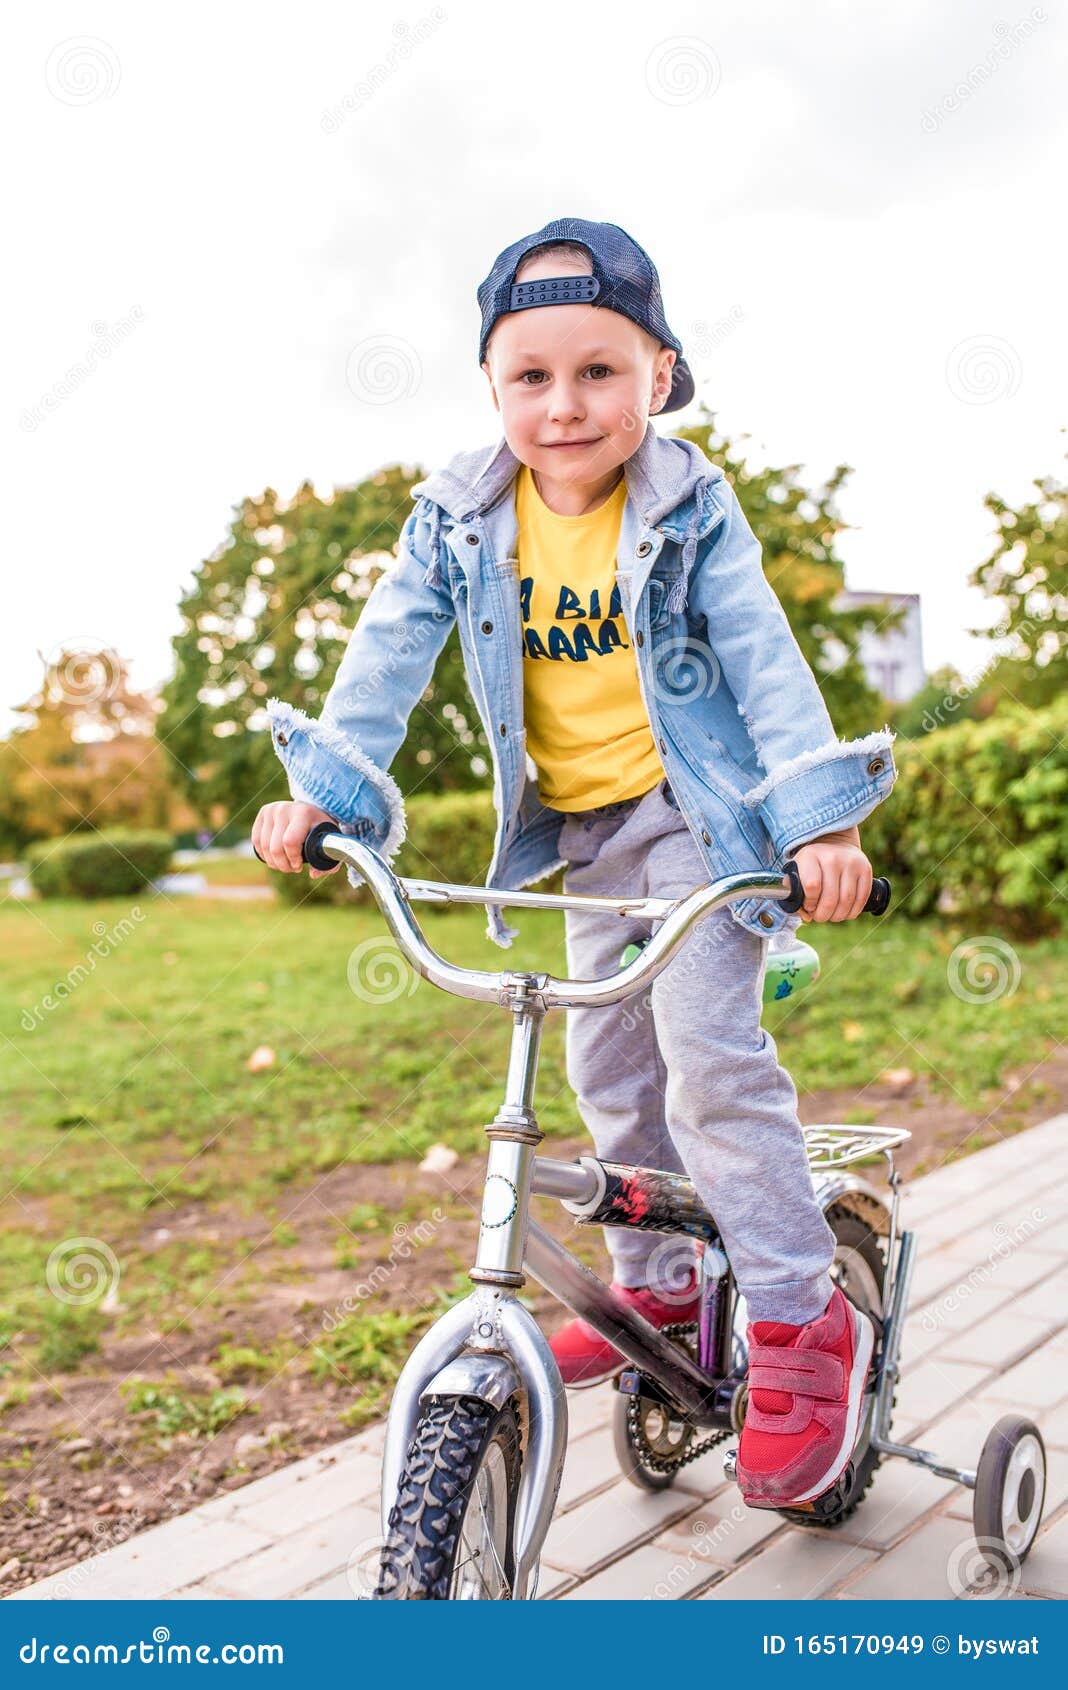 how to teach 5 year old to ride a bike